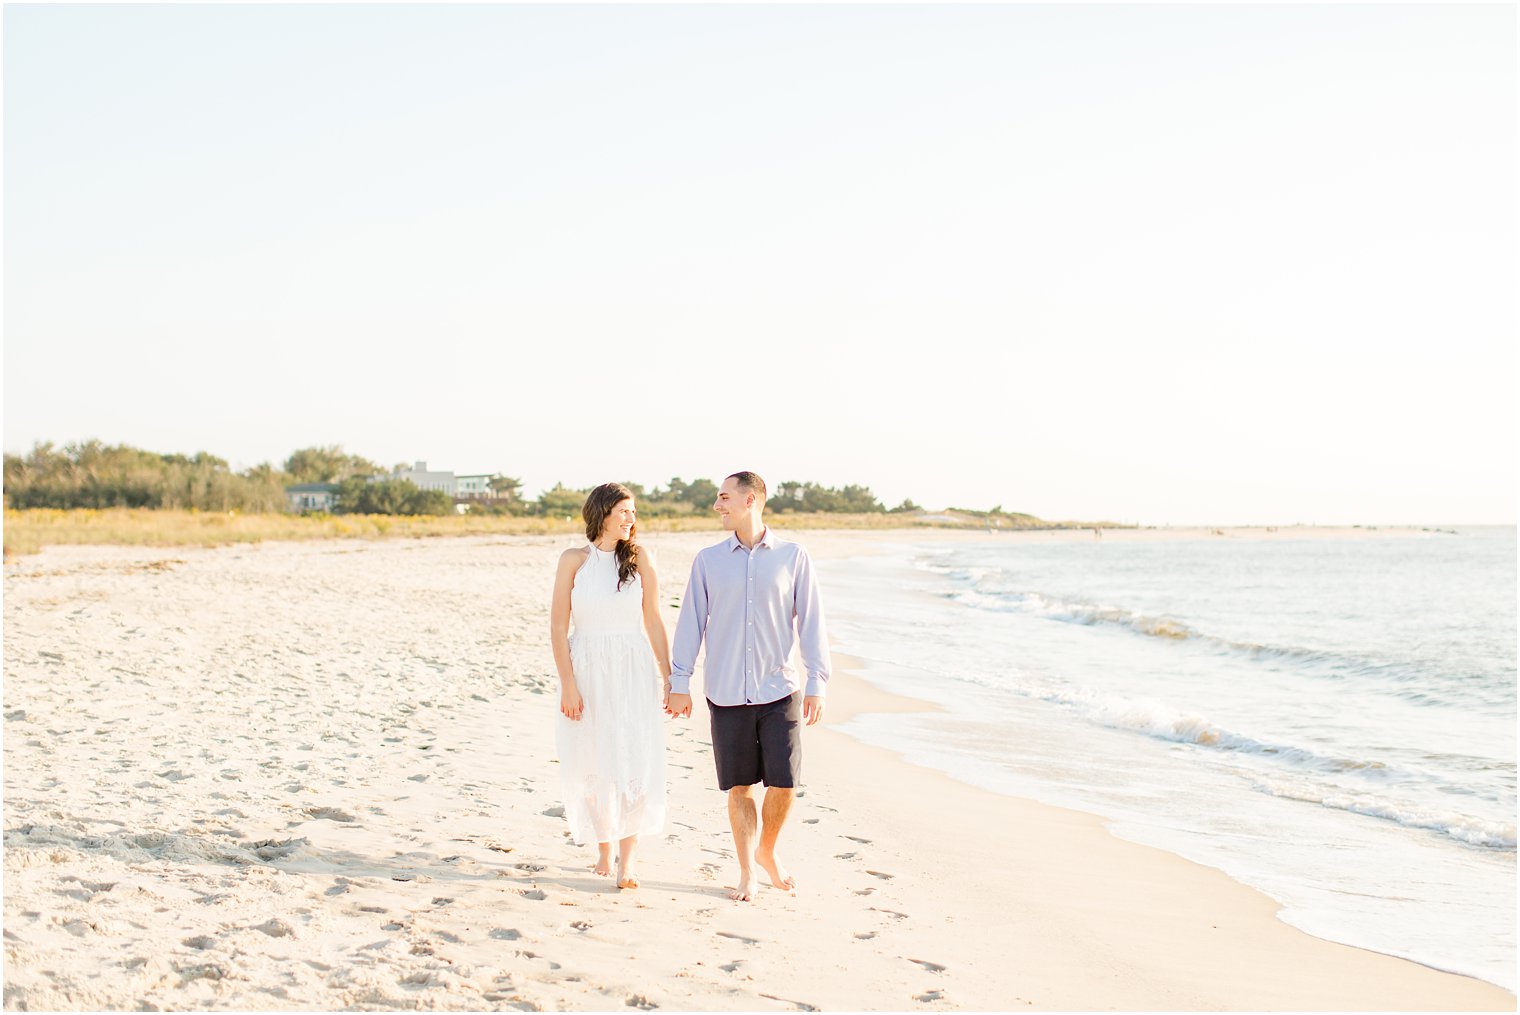 Engagement session at Sunset Beach in Cape May